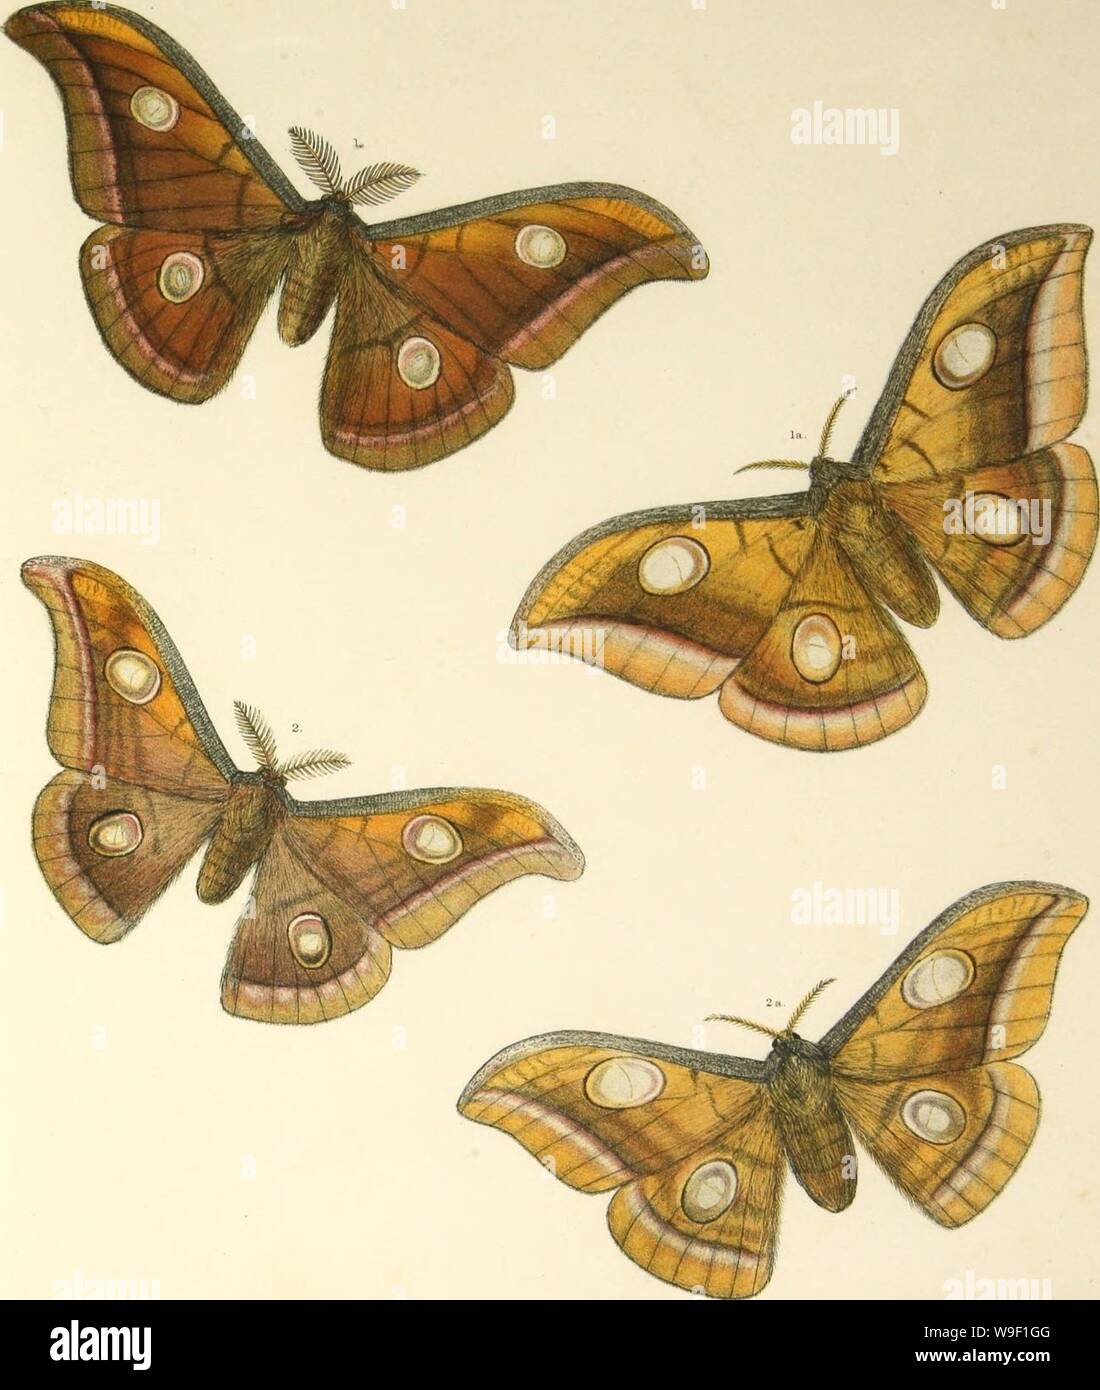 Archive image from page 8 of The silkworm moths of India; Stock Photo